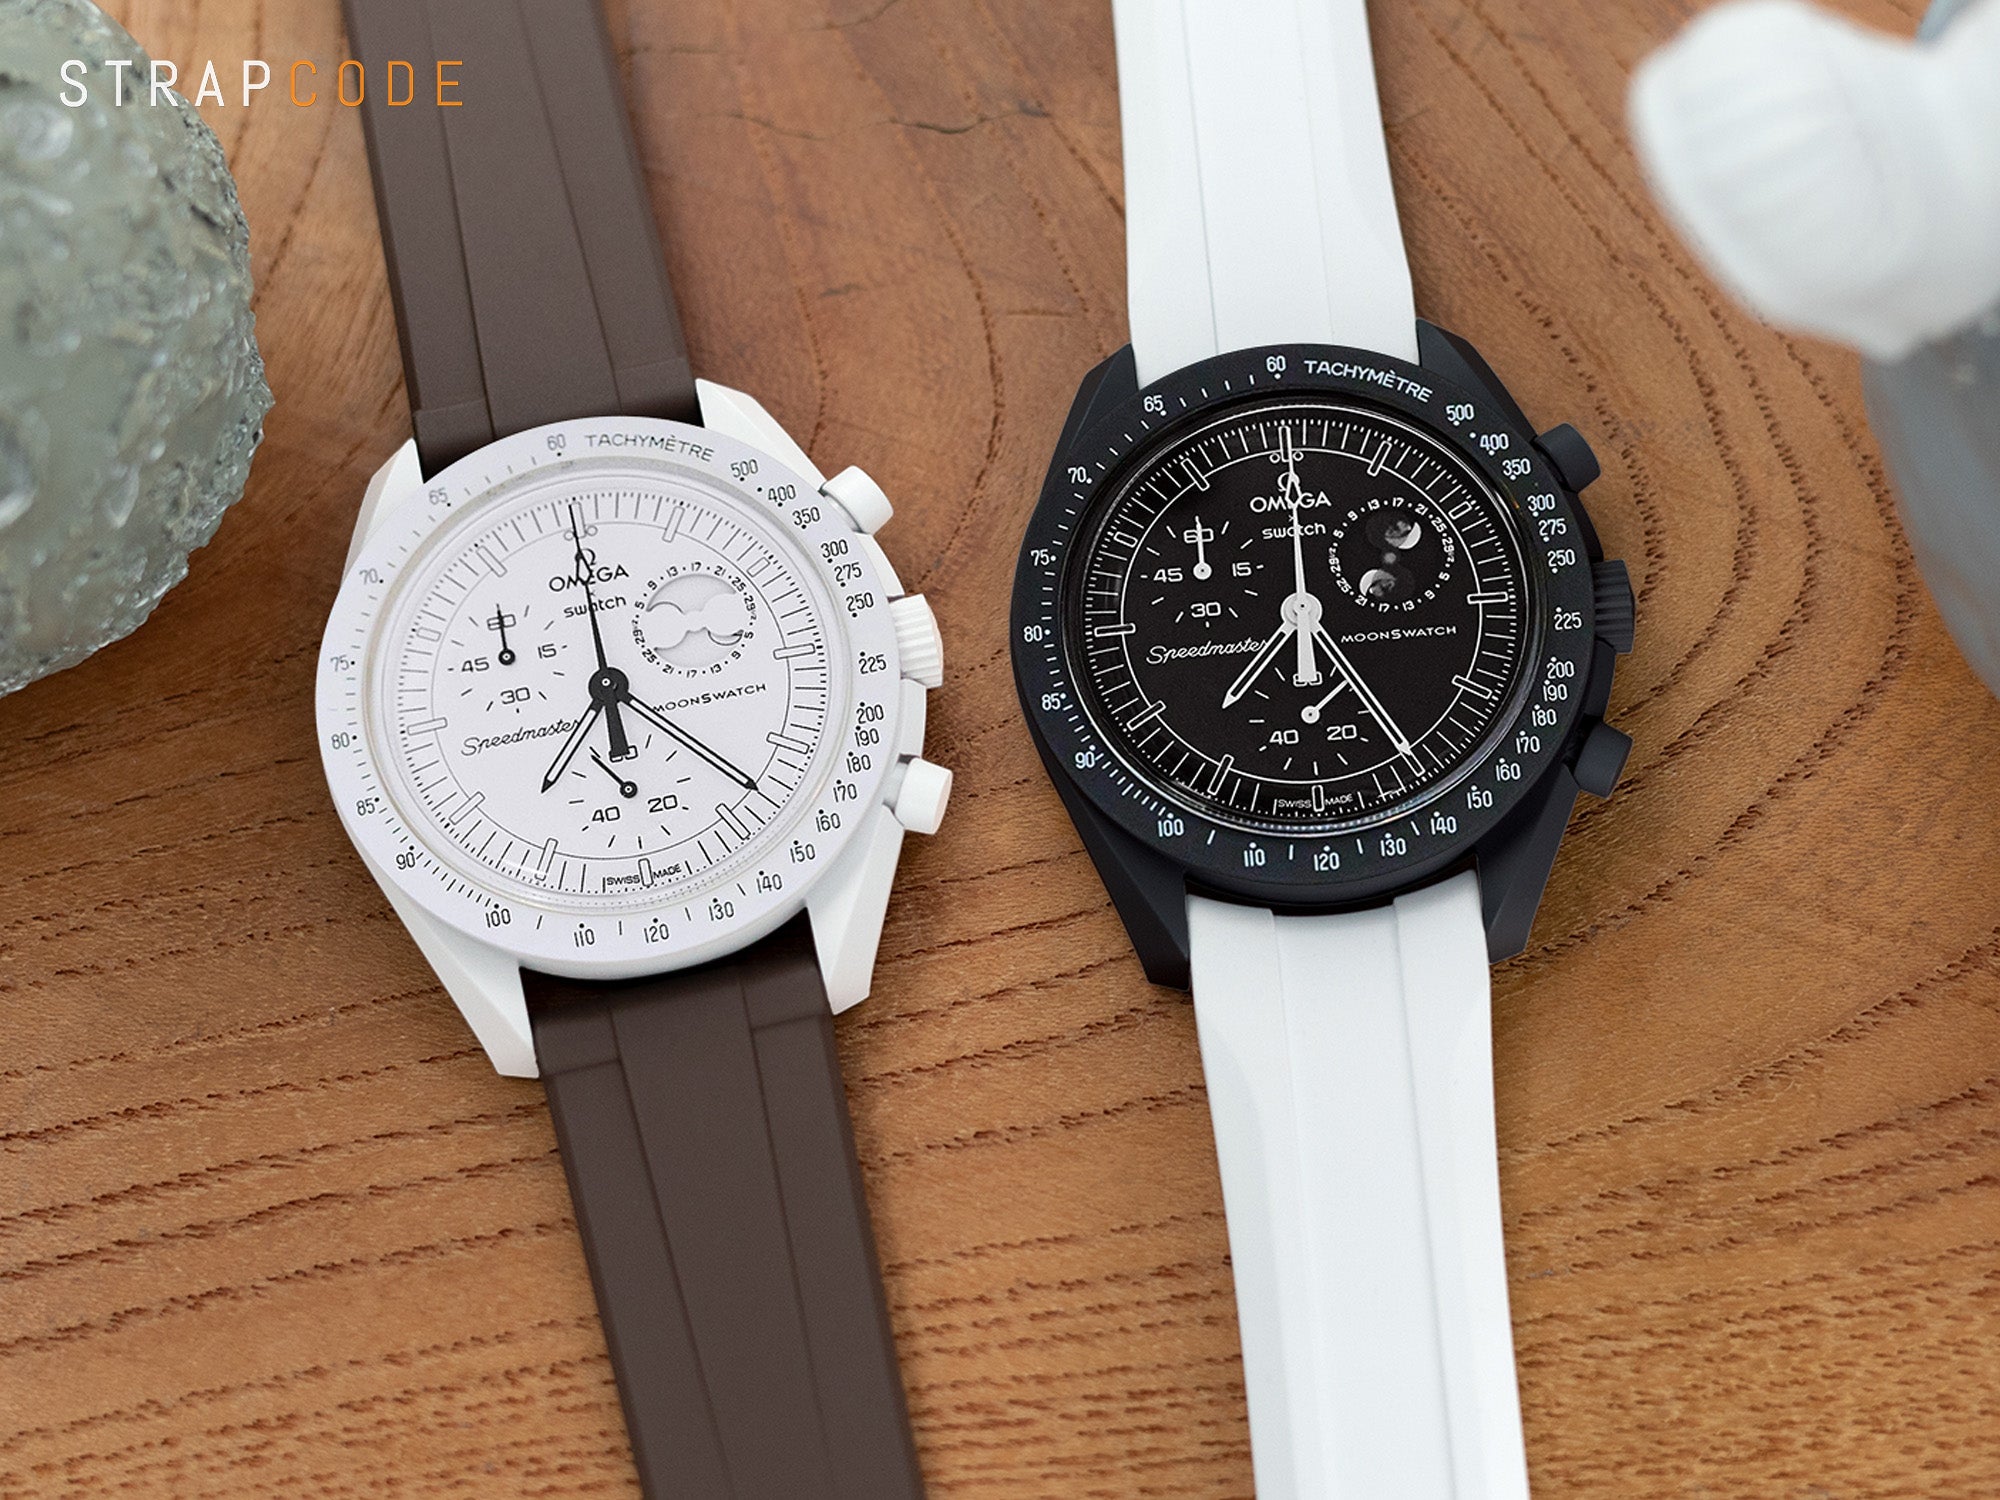 the Mission to Moonphase Snoopy MoonSwatch in both sleek black and classic white editions paired with FKM rubber watch bands from Strapcode